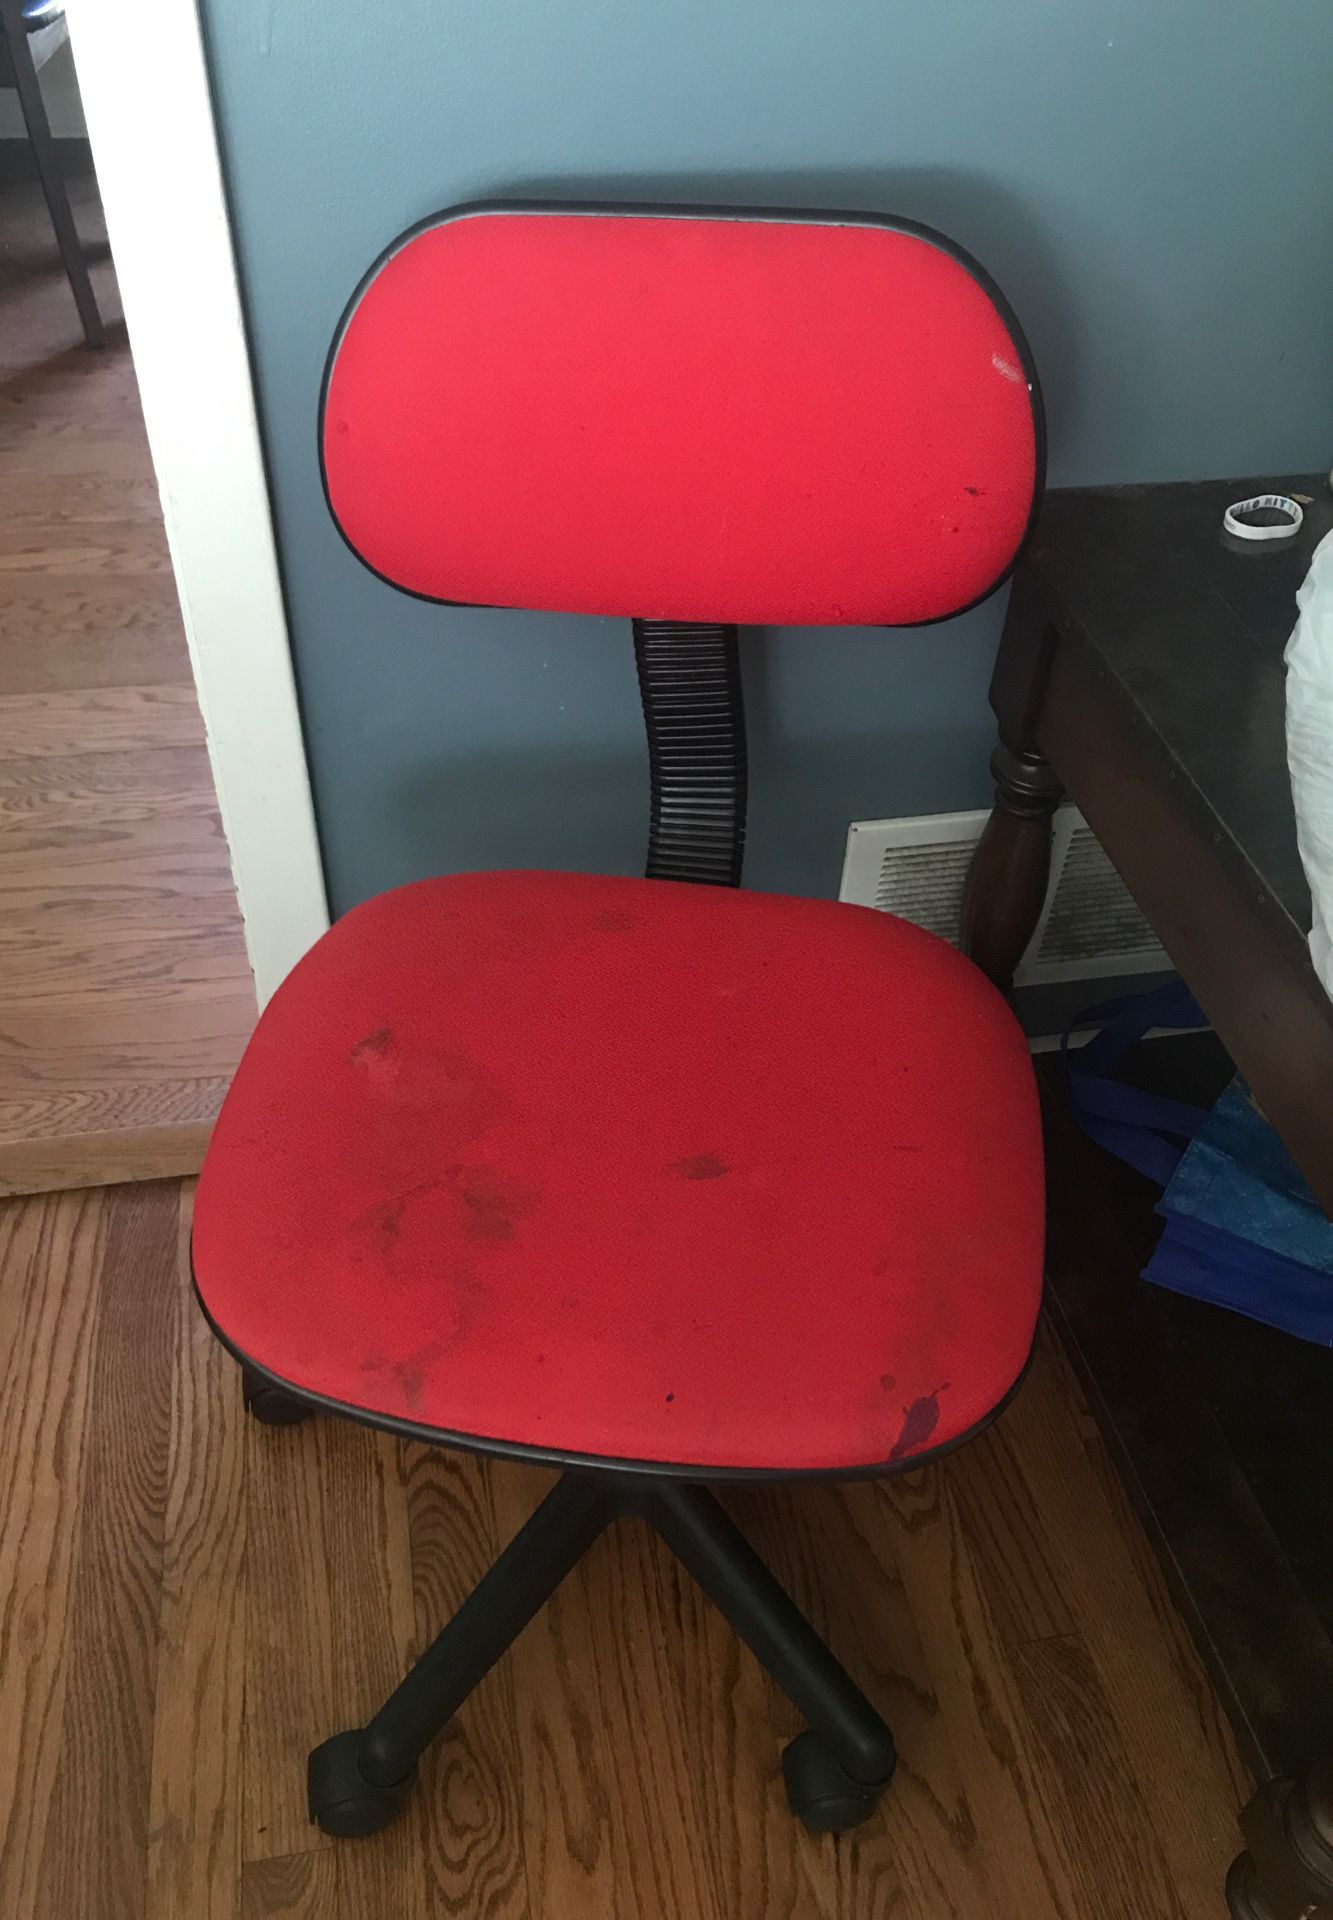 Free red desk chair.